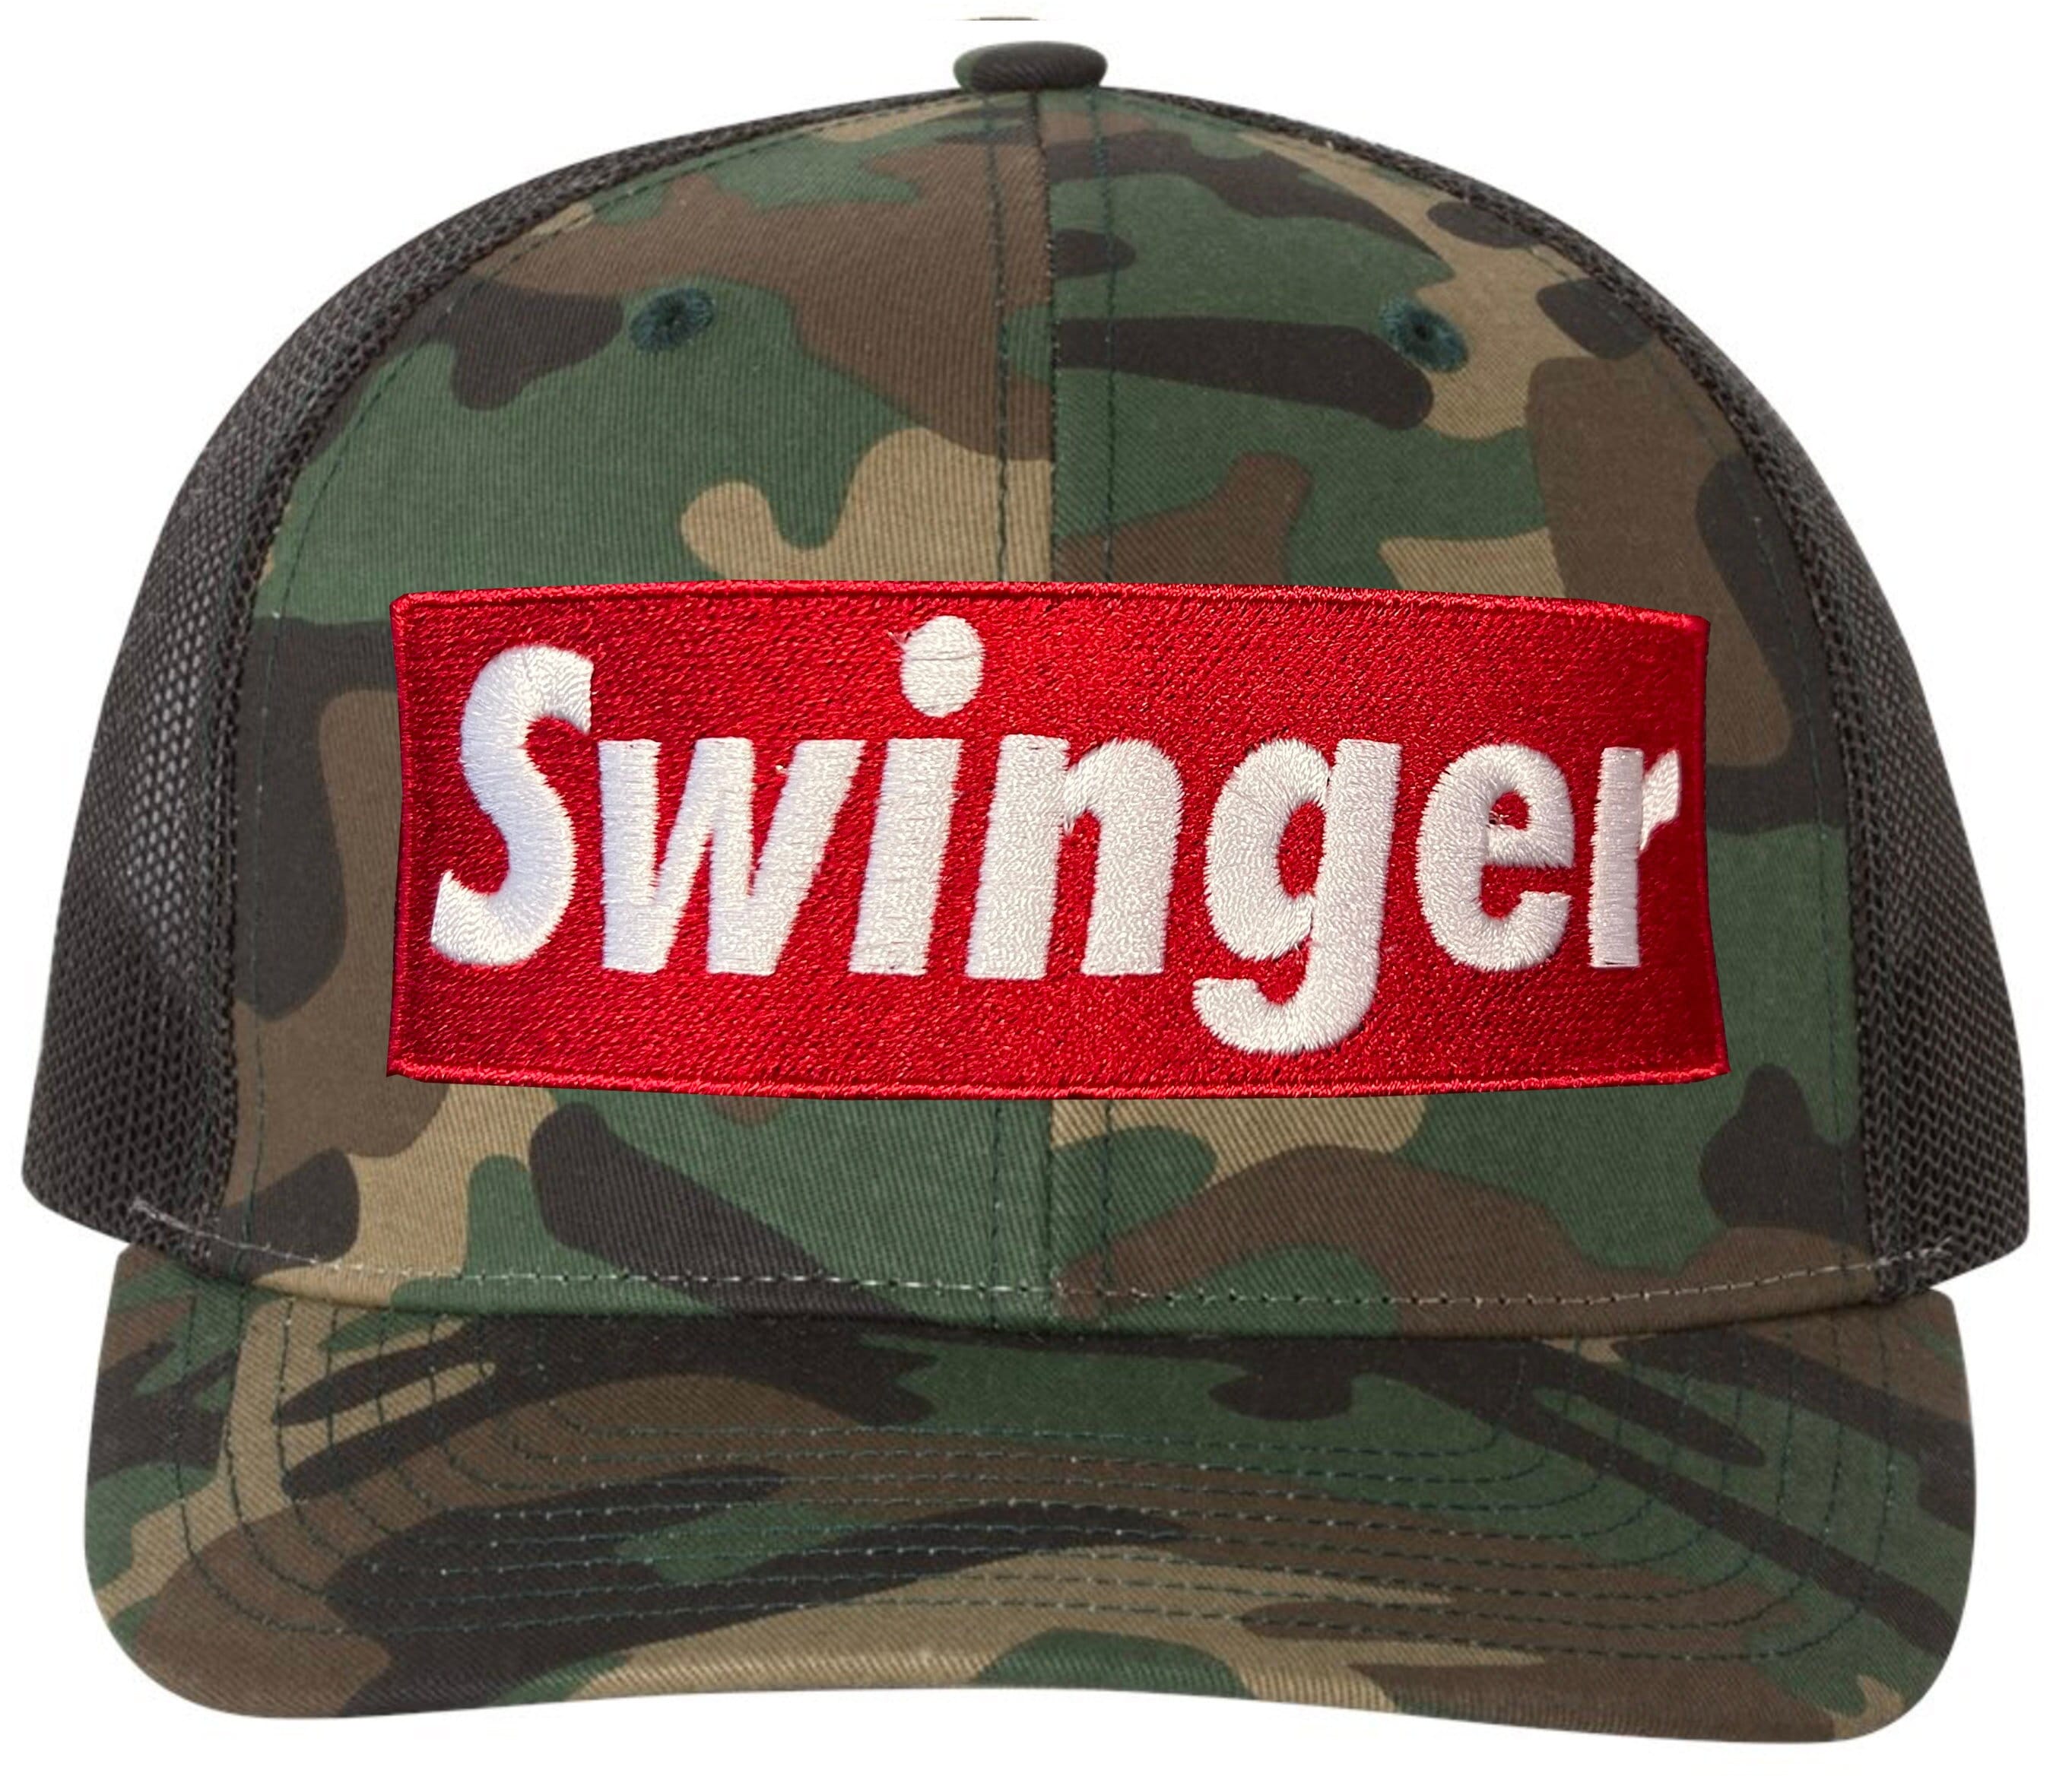 Embroidered SWINGER Camo Hat Adult Mature Hat pic photo